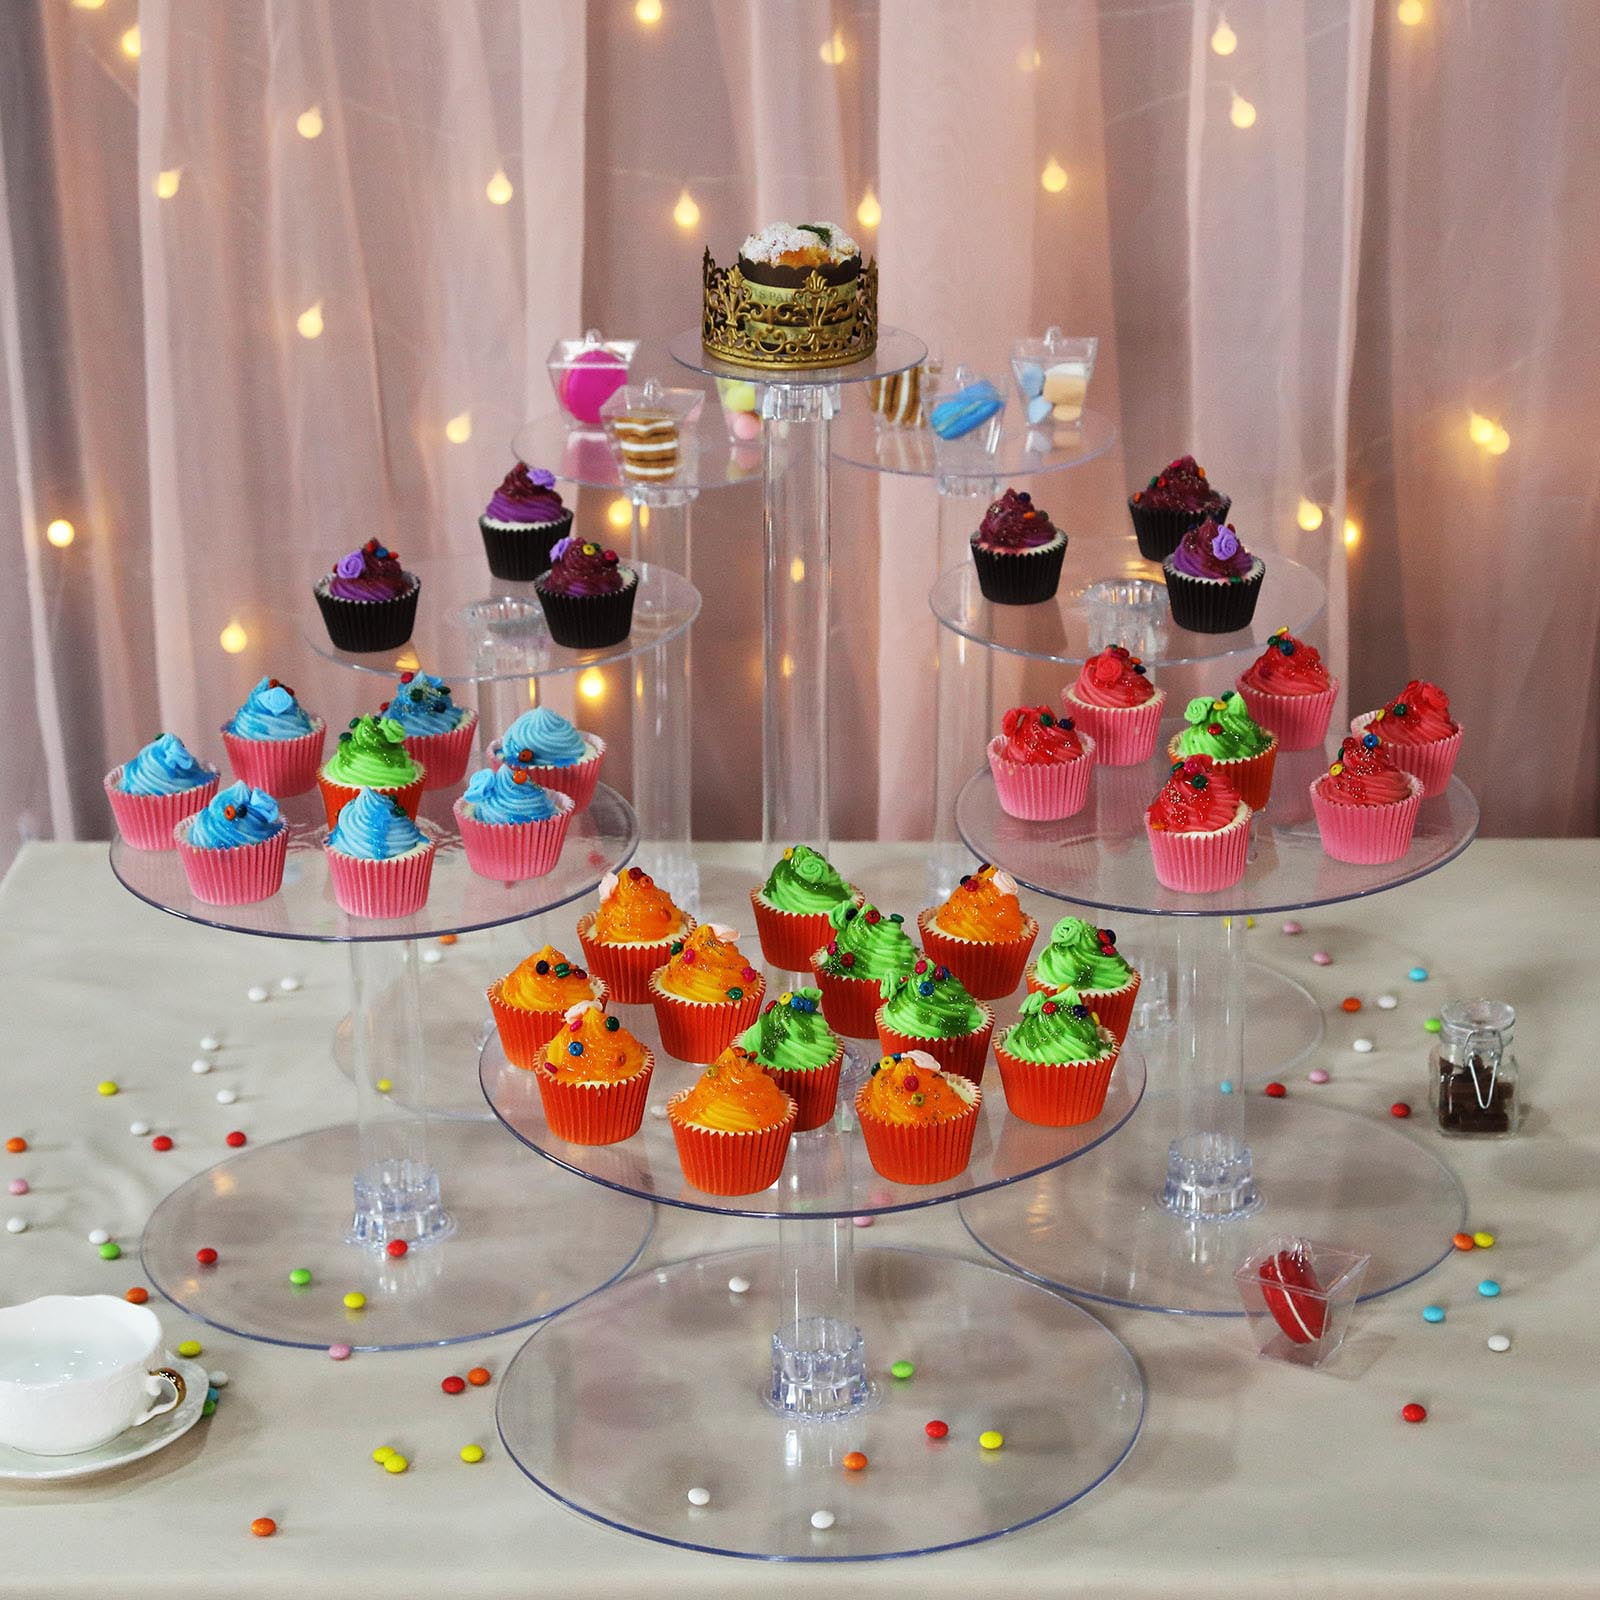 2 3 4 5 TIERS CIRCLE ACRYLIC CUPCAKE PARTY WEDDING CAKE STAND DECORATING CARRY 